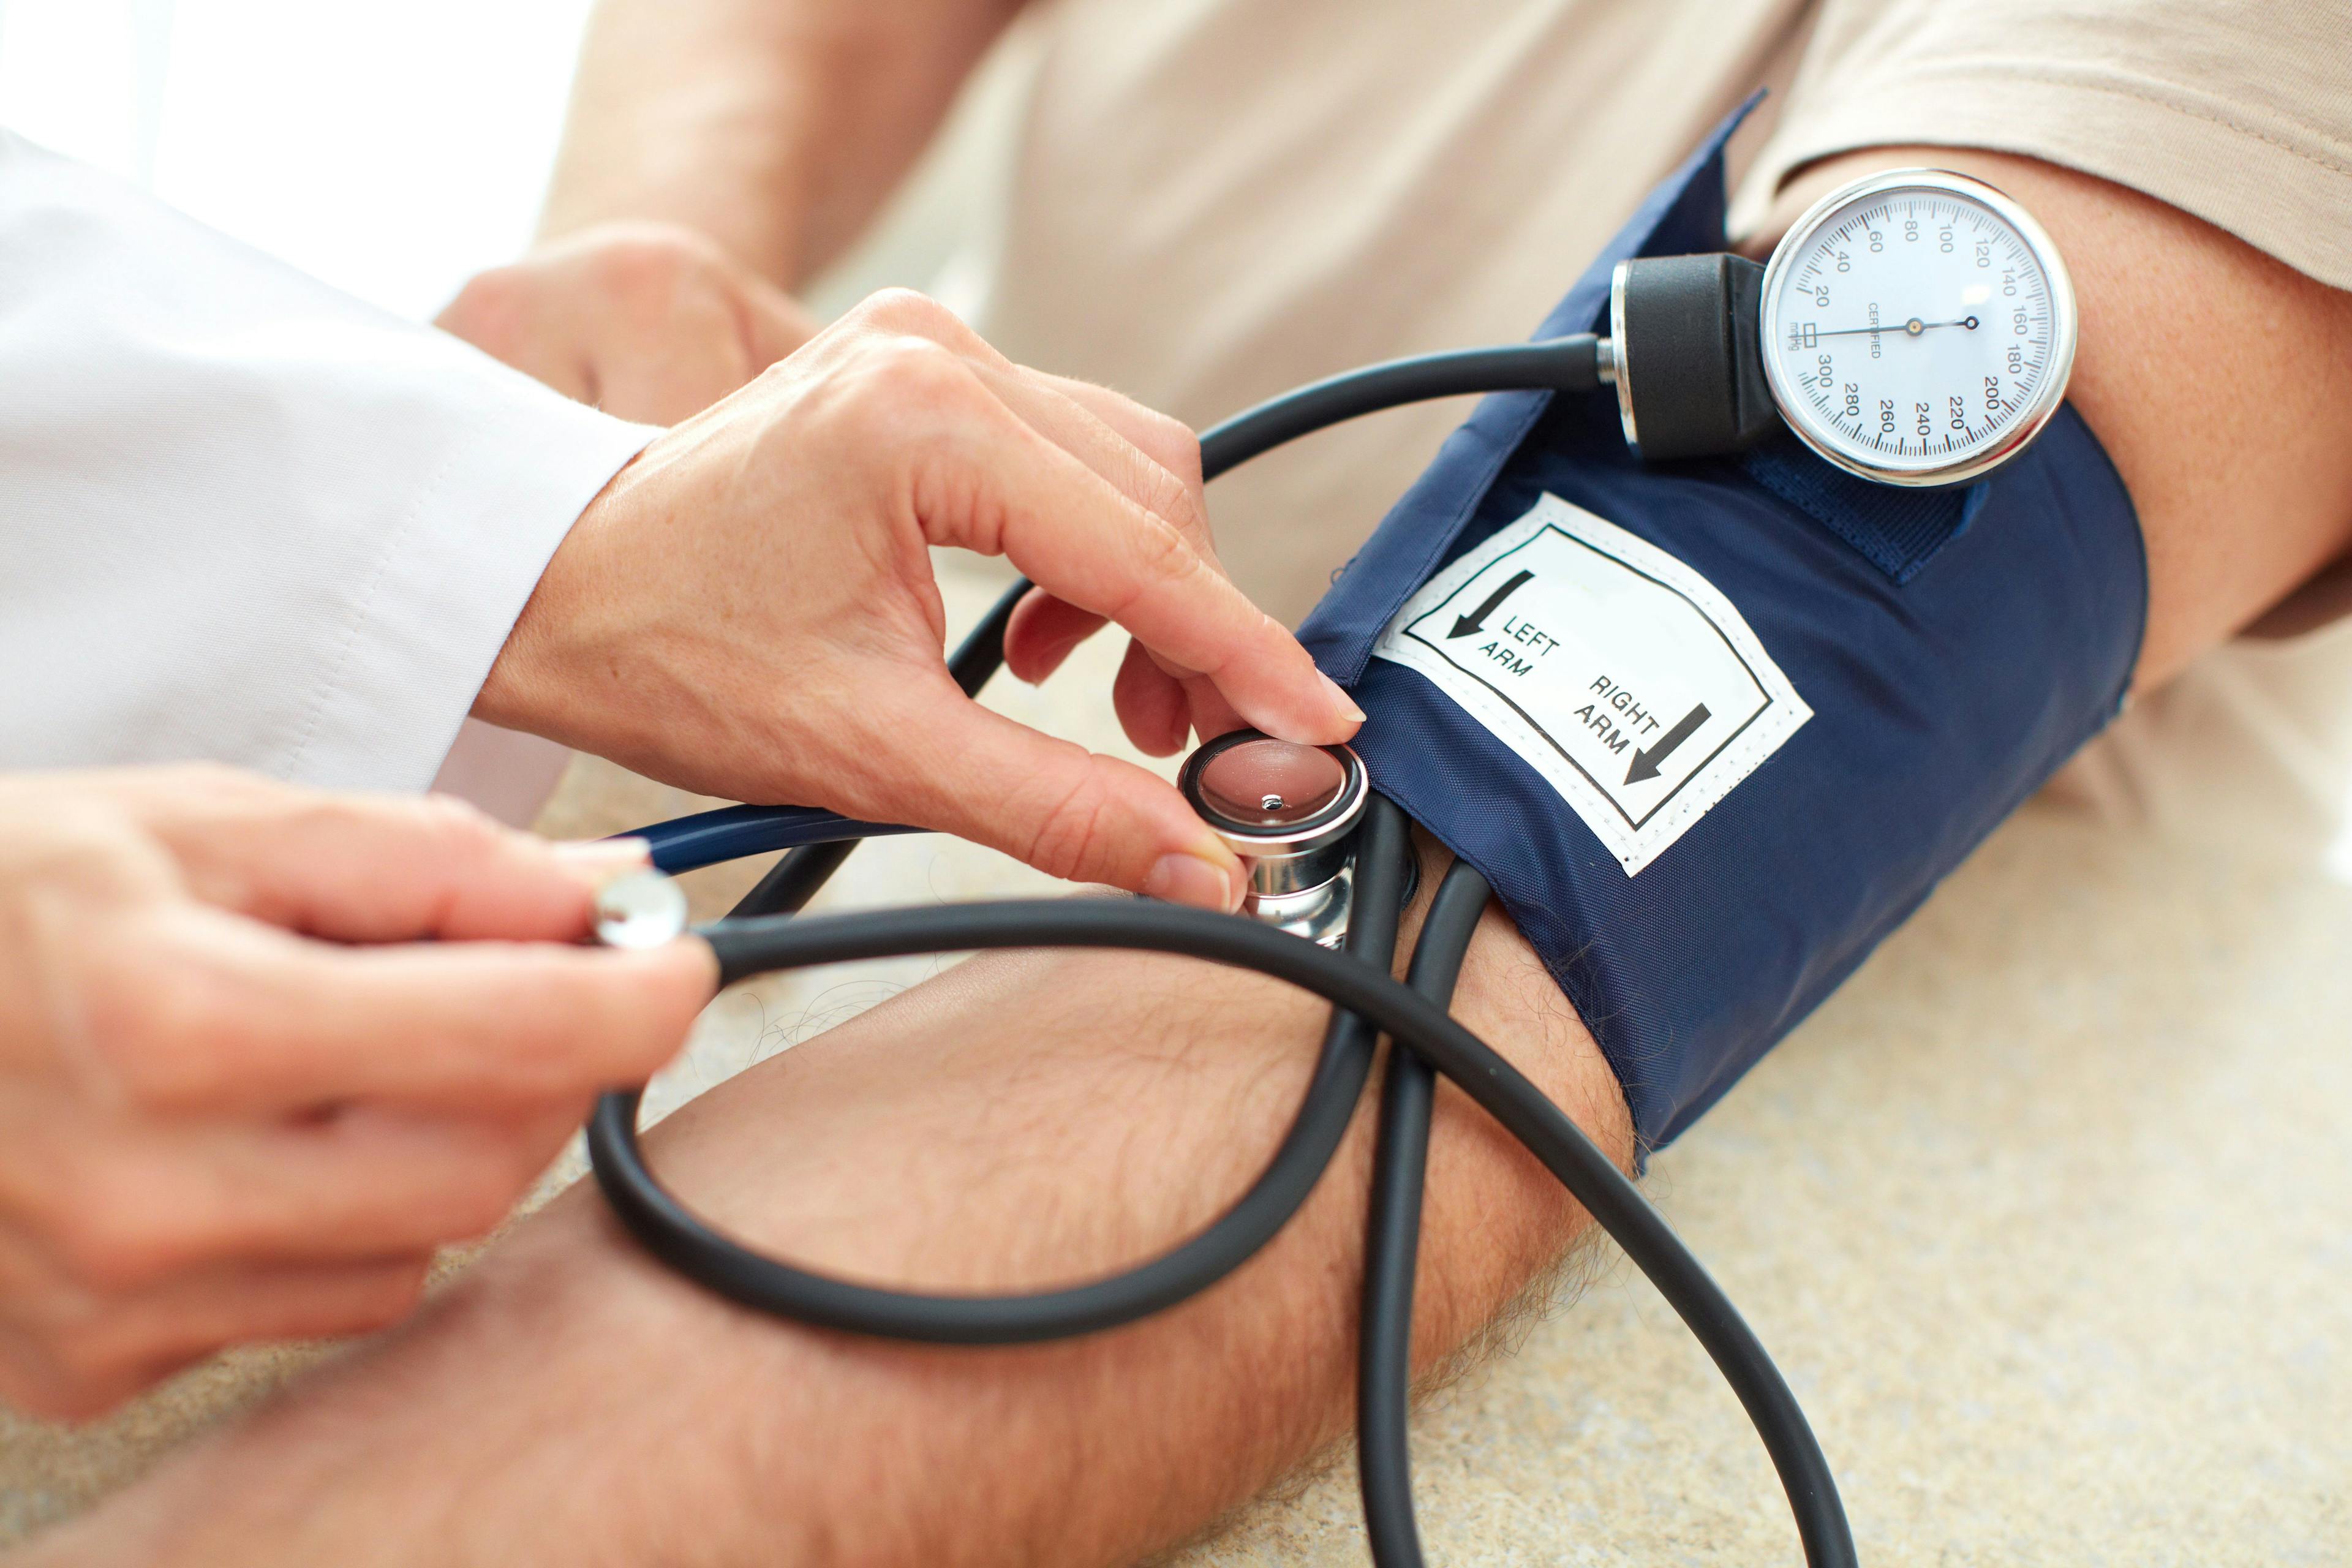 Zilebesiran Offers An RNA Interference Therapeutic Agent for Hypertension